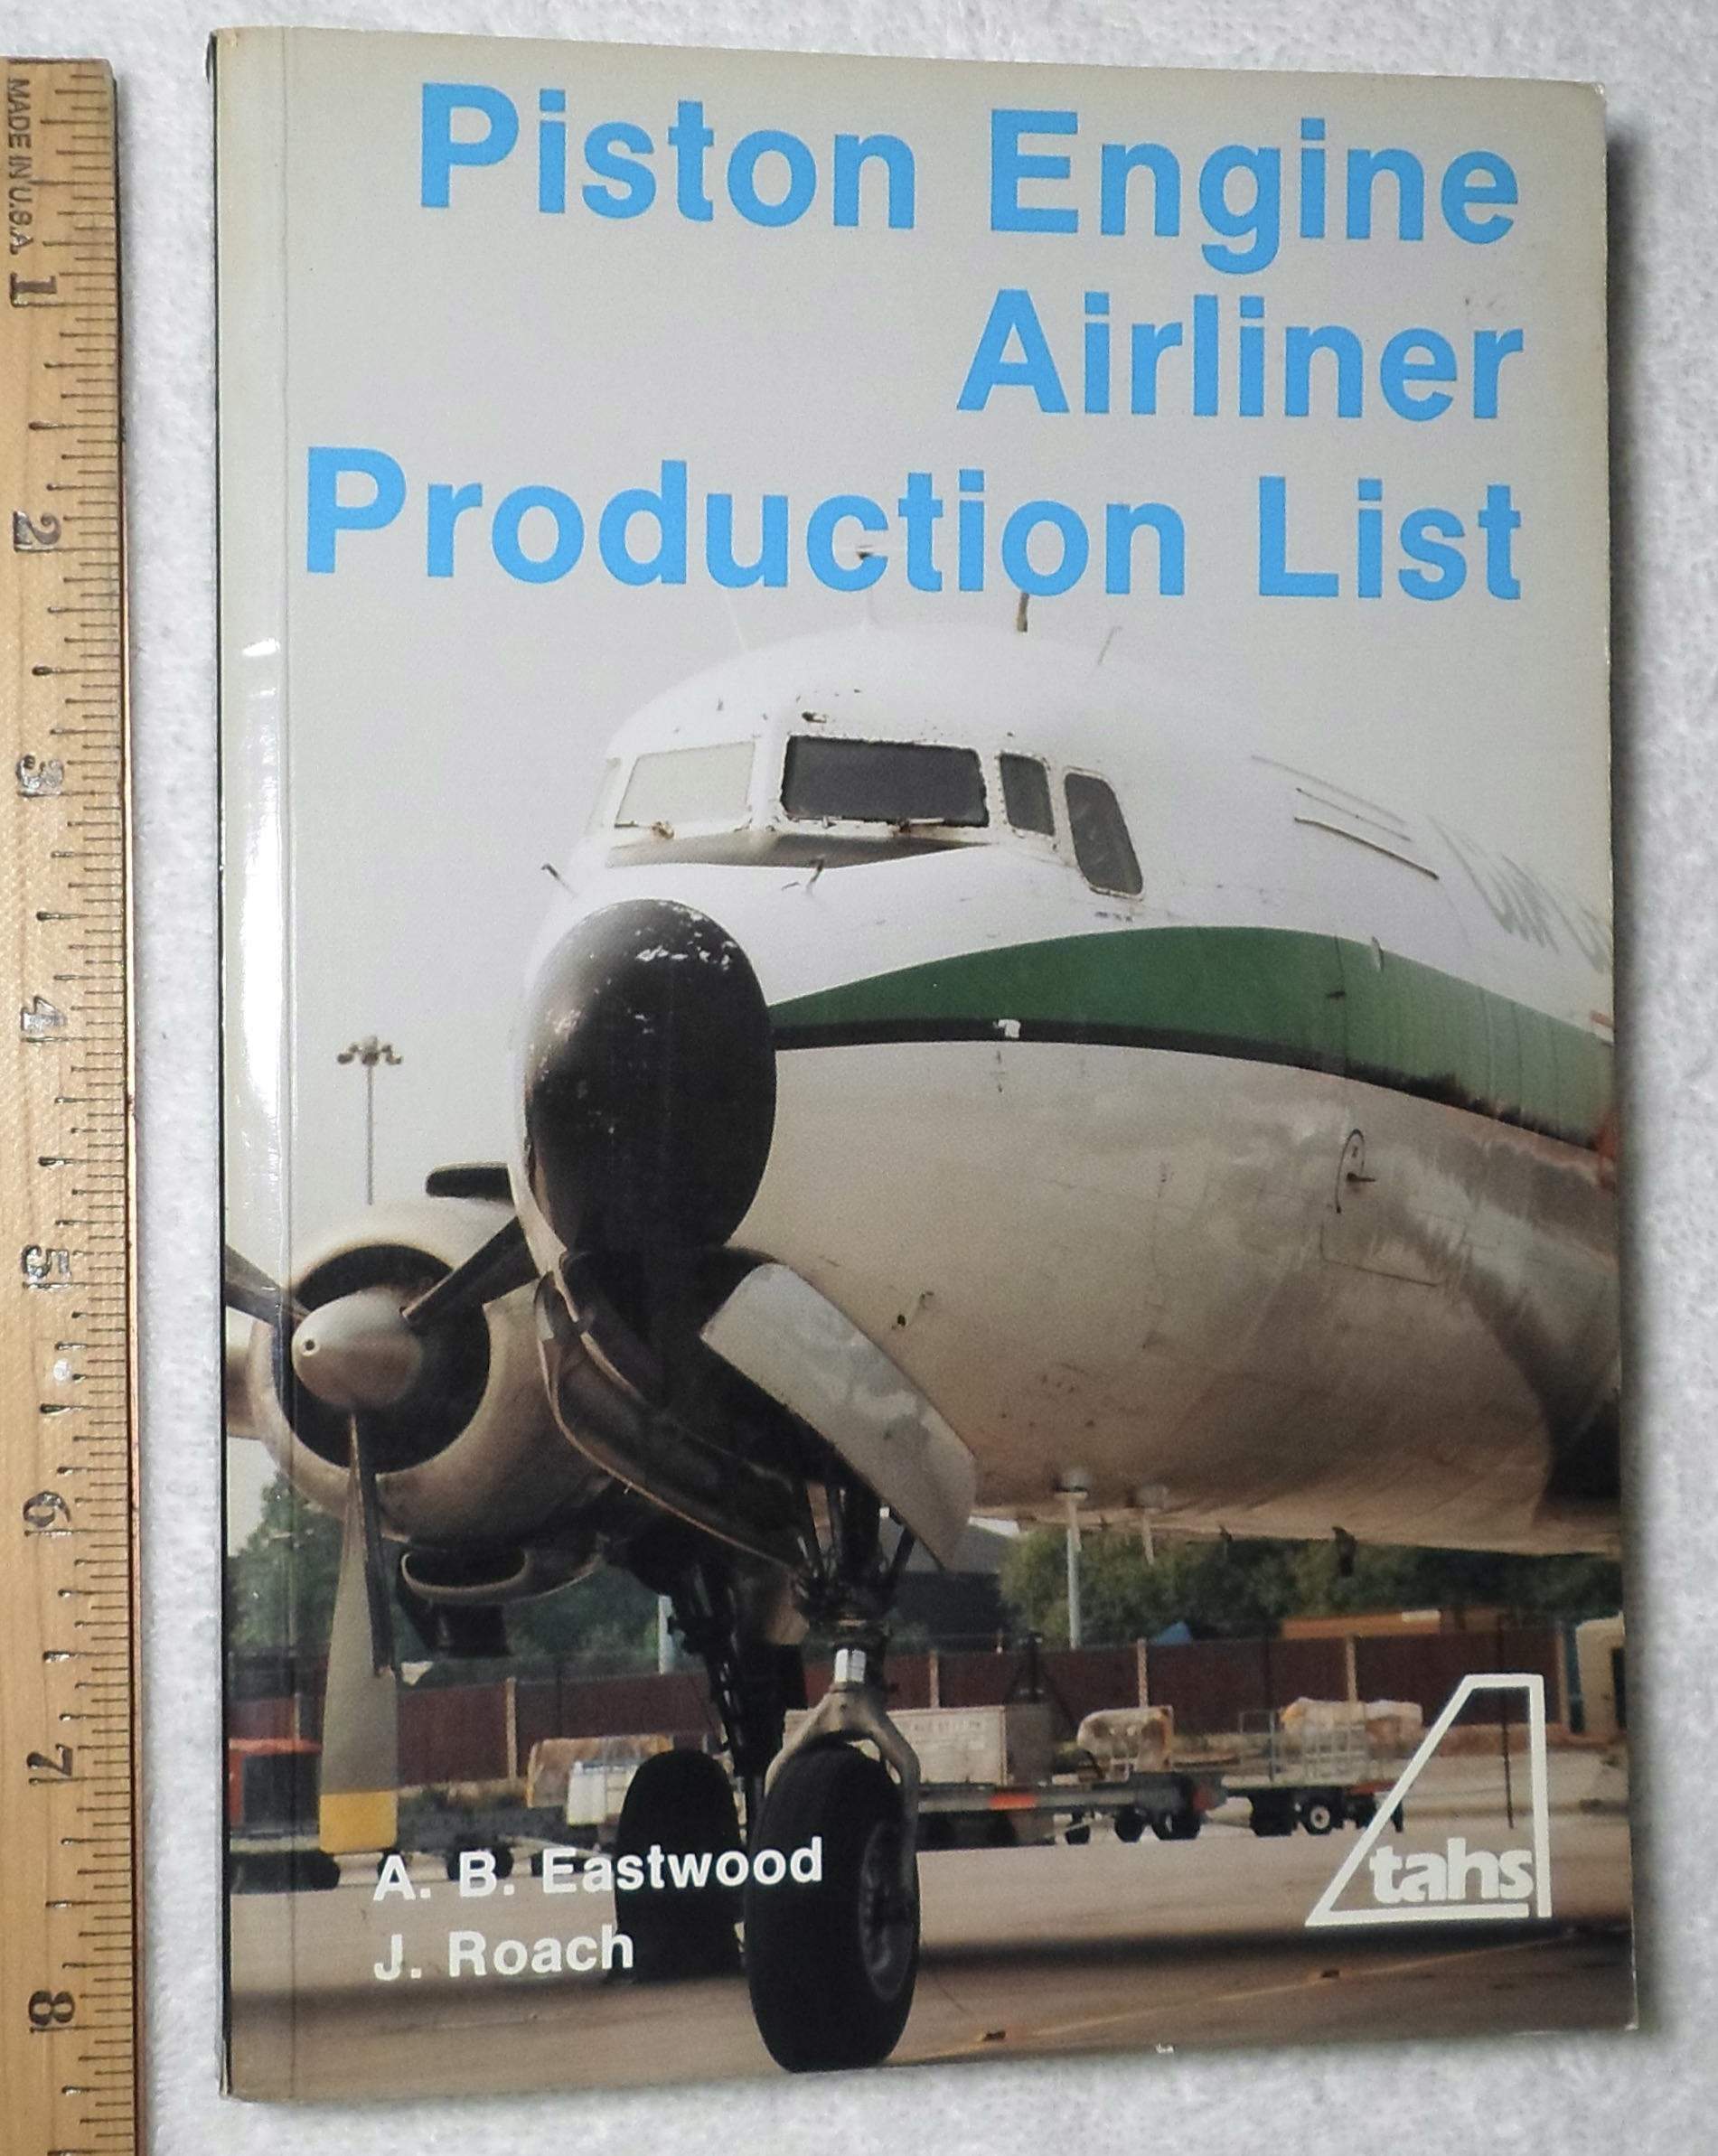 Piston Engine Airliner Production List - A. B. Eastwood; J. Roach